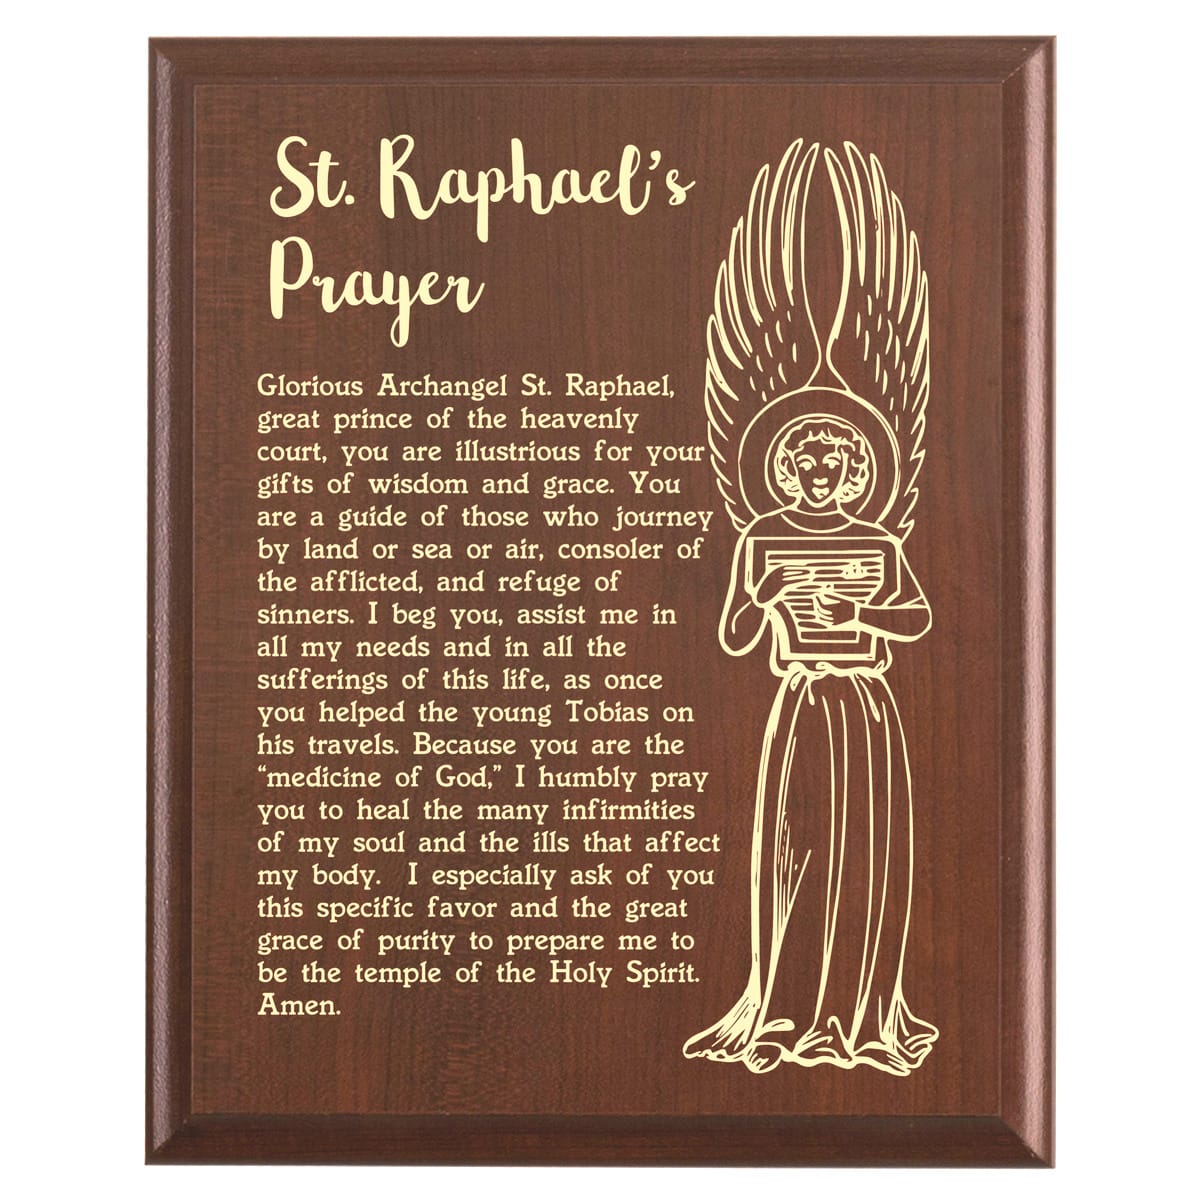 Plaque photo: St. Raphael Archangel Prayer Plaque design with free personalization. Wood style finish with customized text.